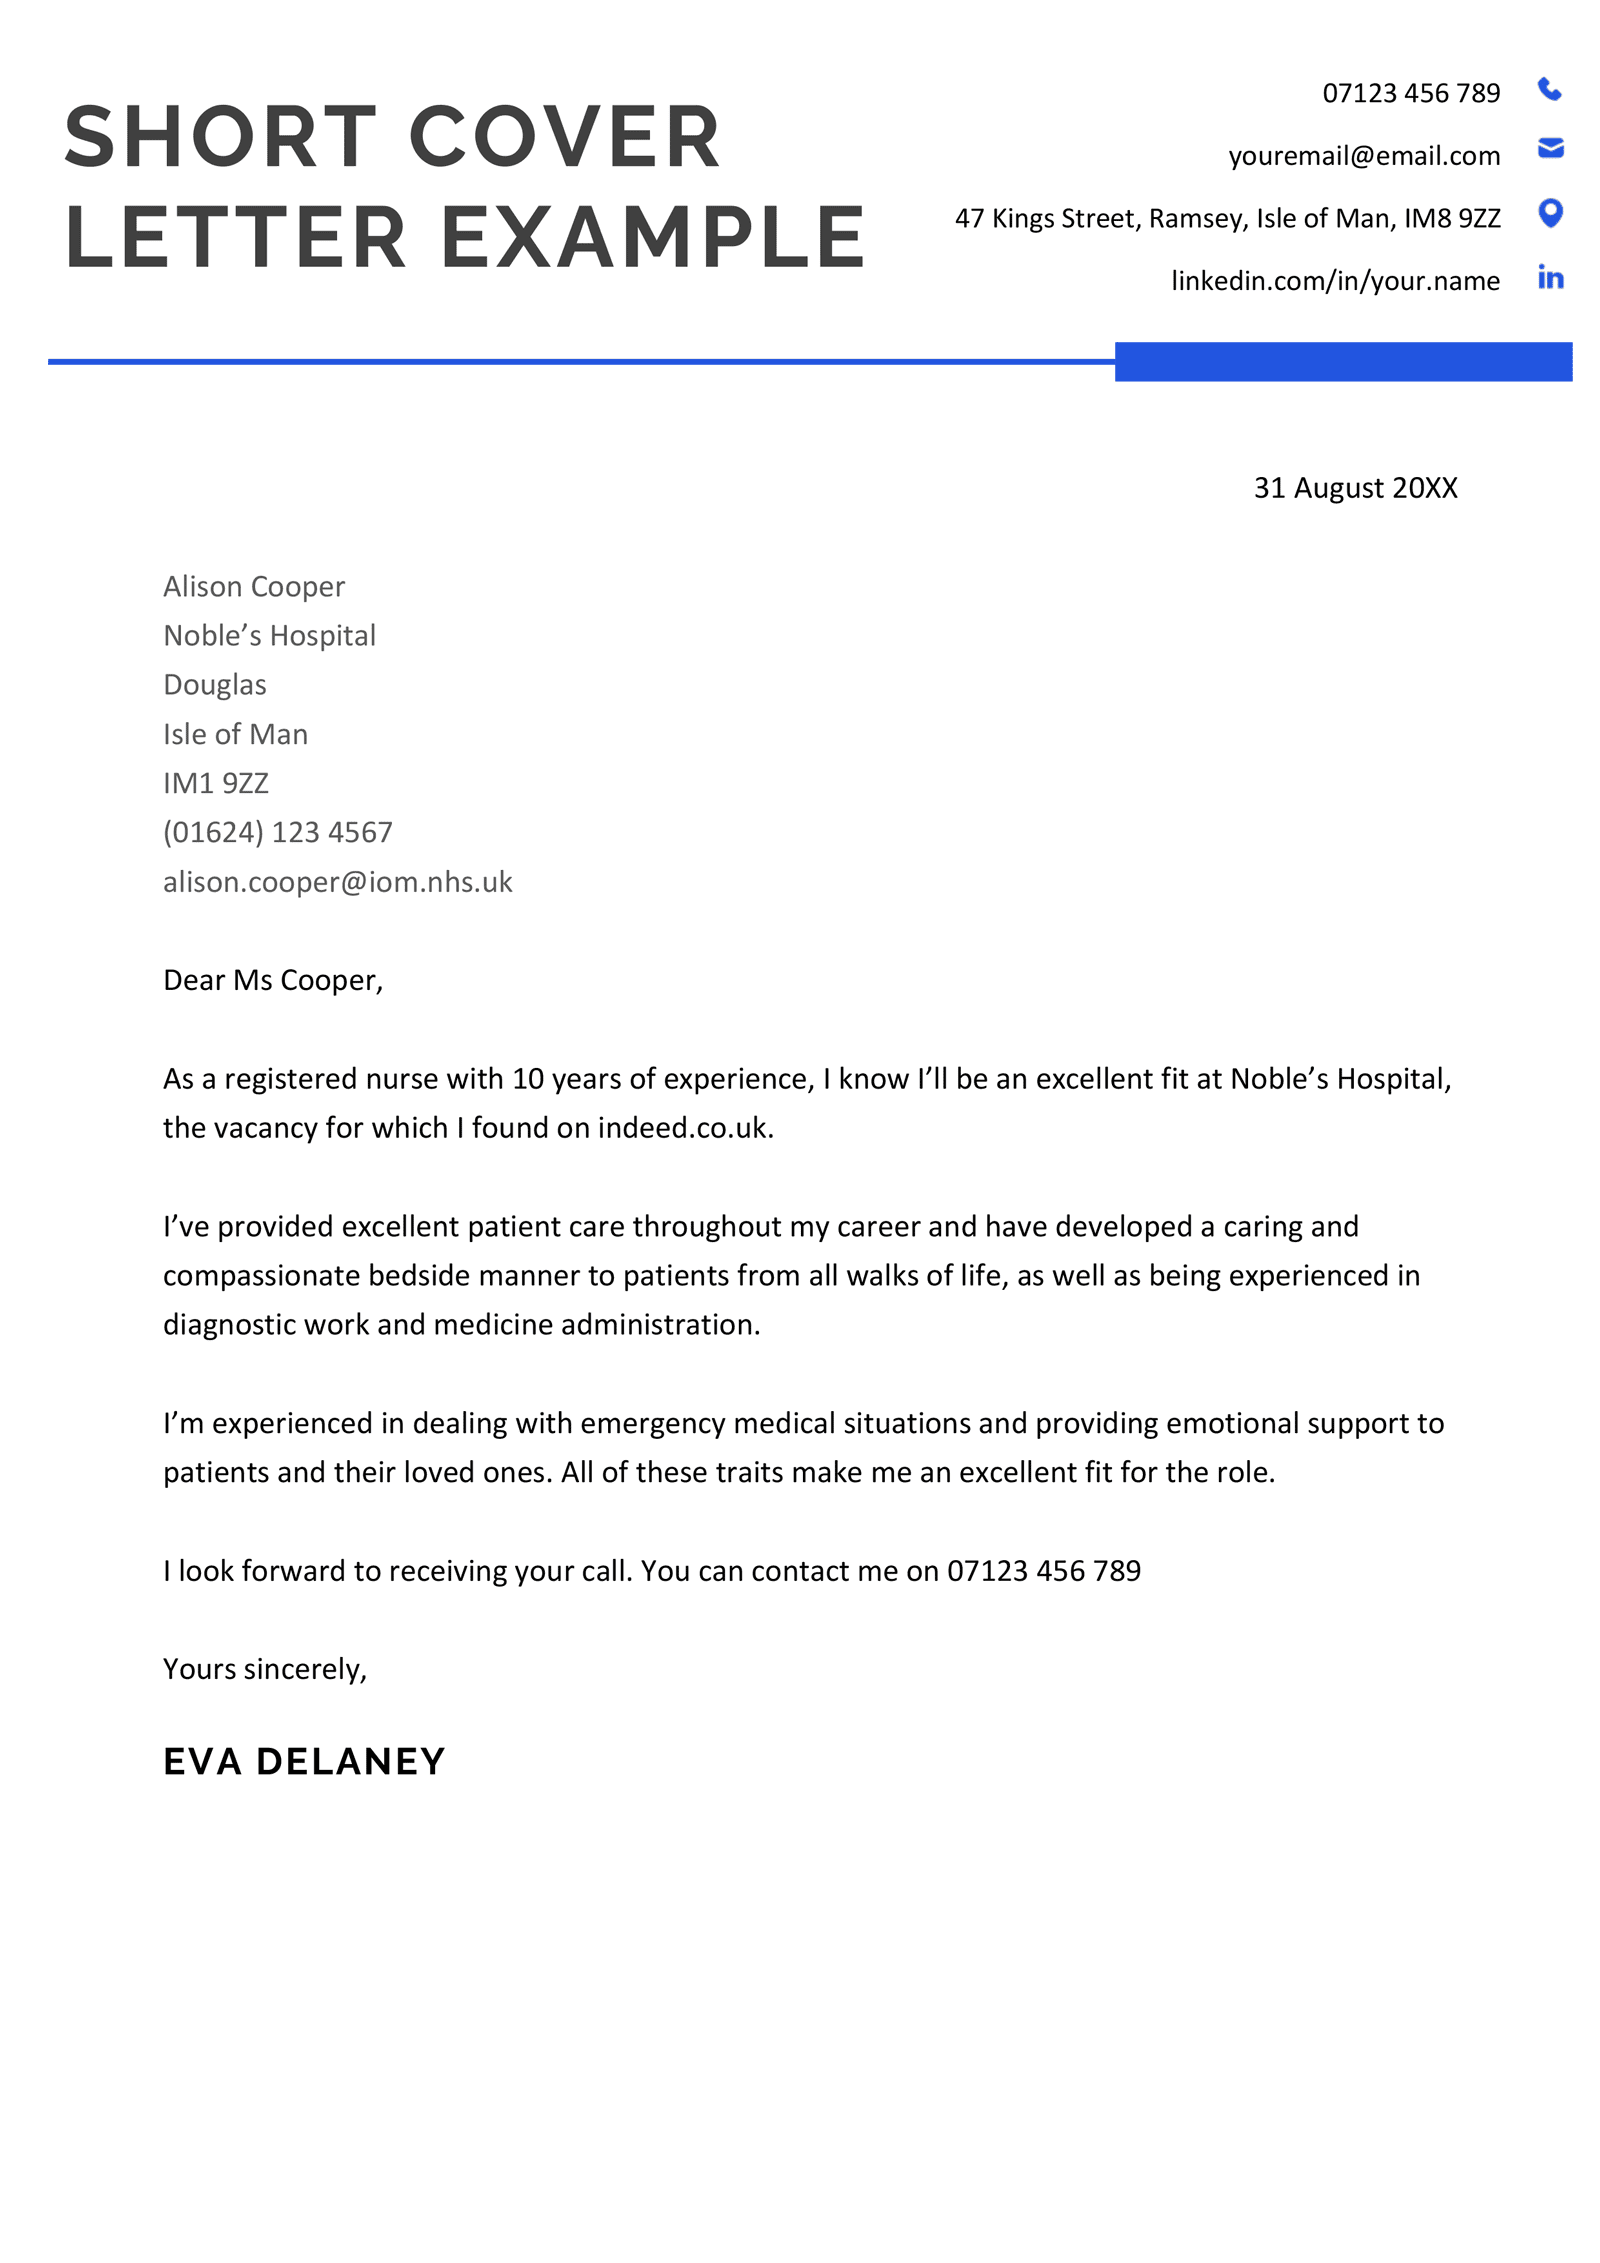 A concise cover letter example featuring a blue line of varying thickness which separates the cover letter header from the body text.